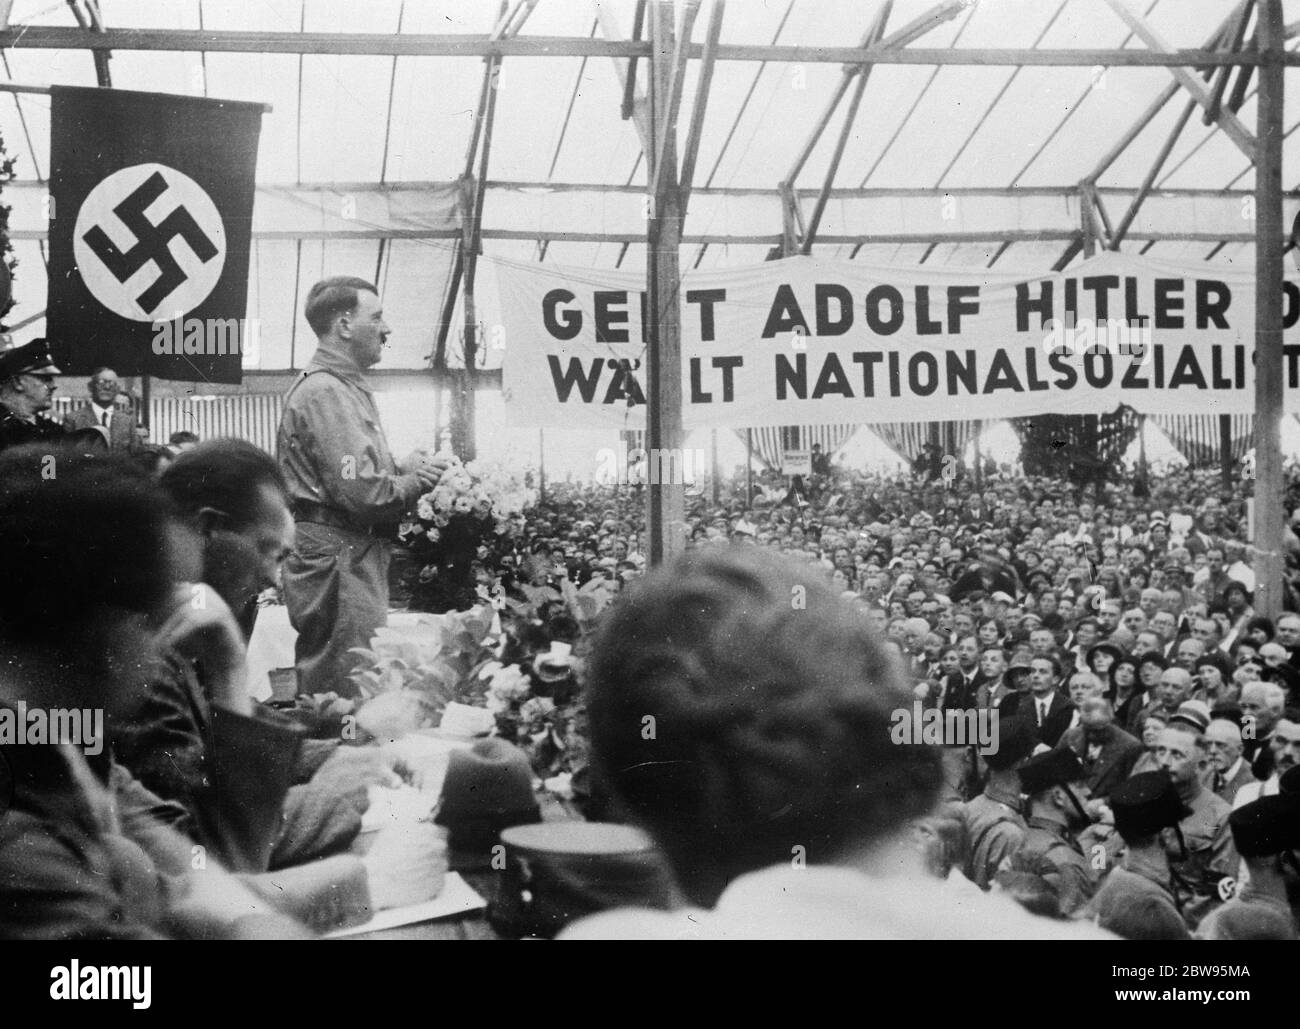 Hitler ' s final appeal in Germany . Adolf Hitler , the German Dascist leader making a final appeal for his party before the national elections . An attempt on his life was made on Saturday by the communists . Stock Photo